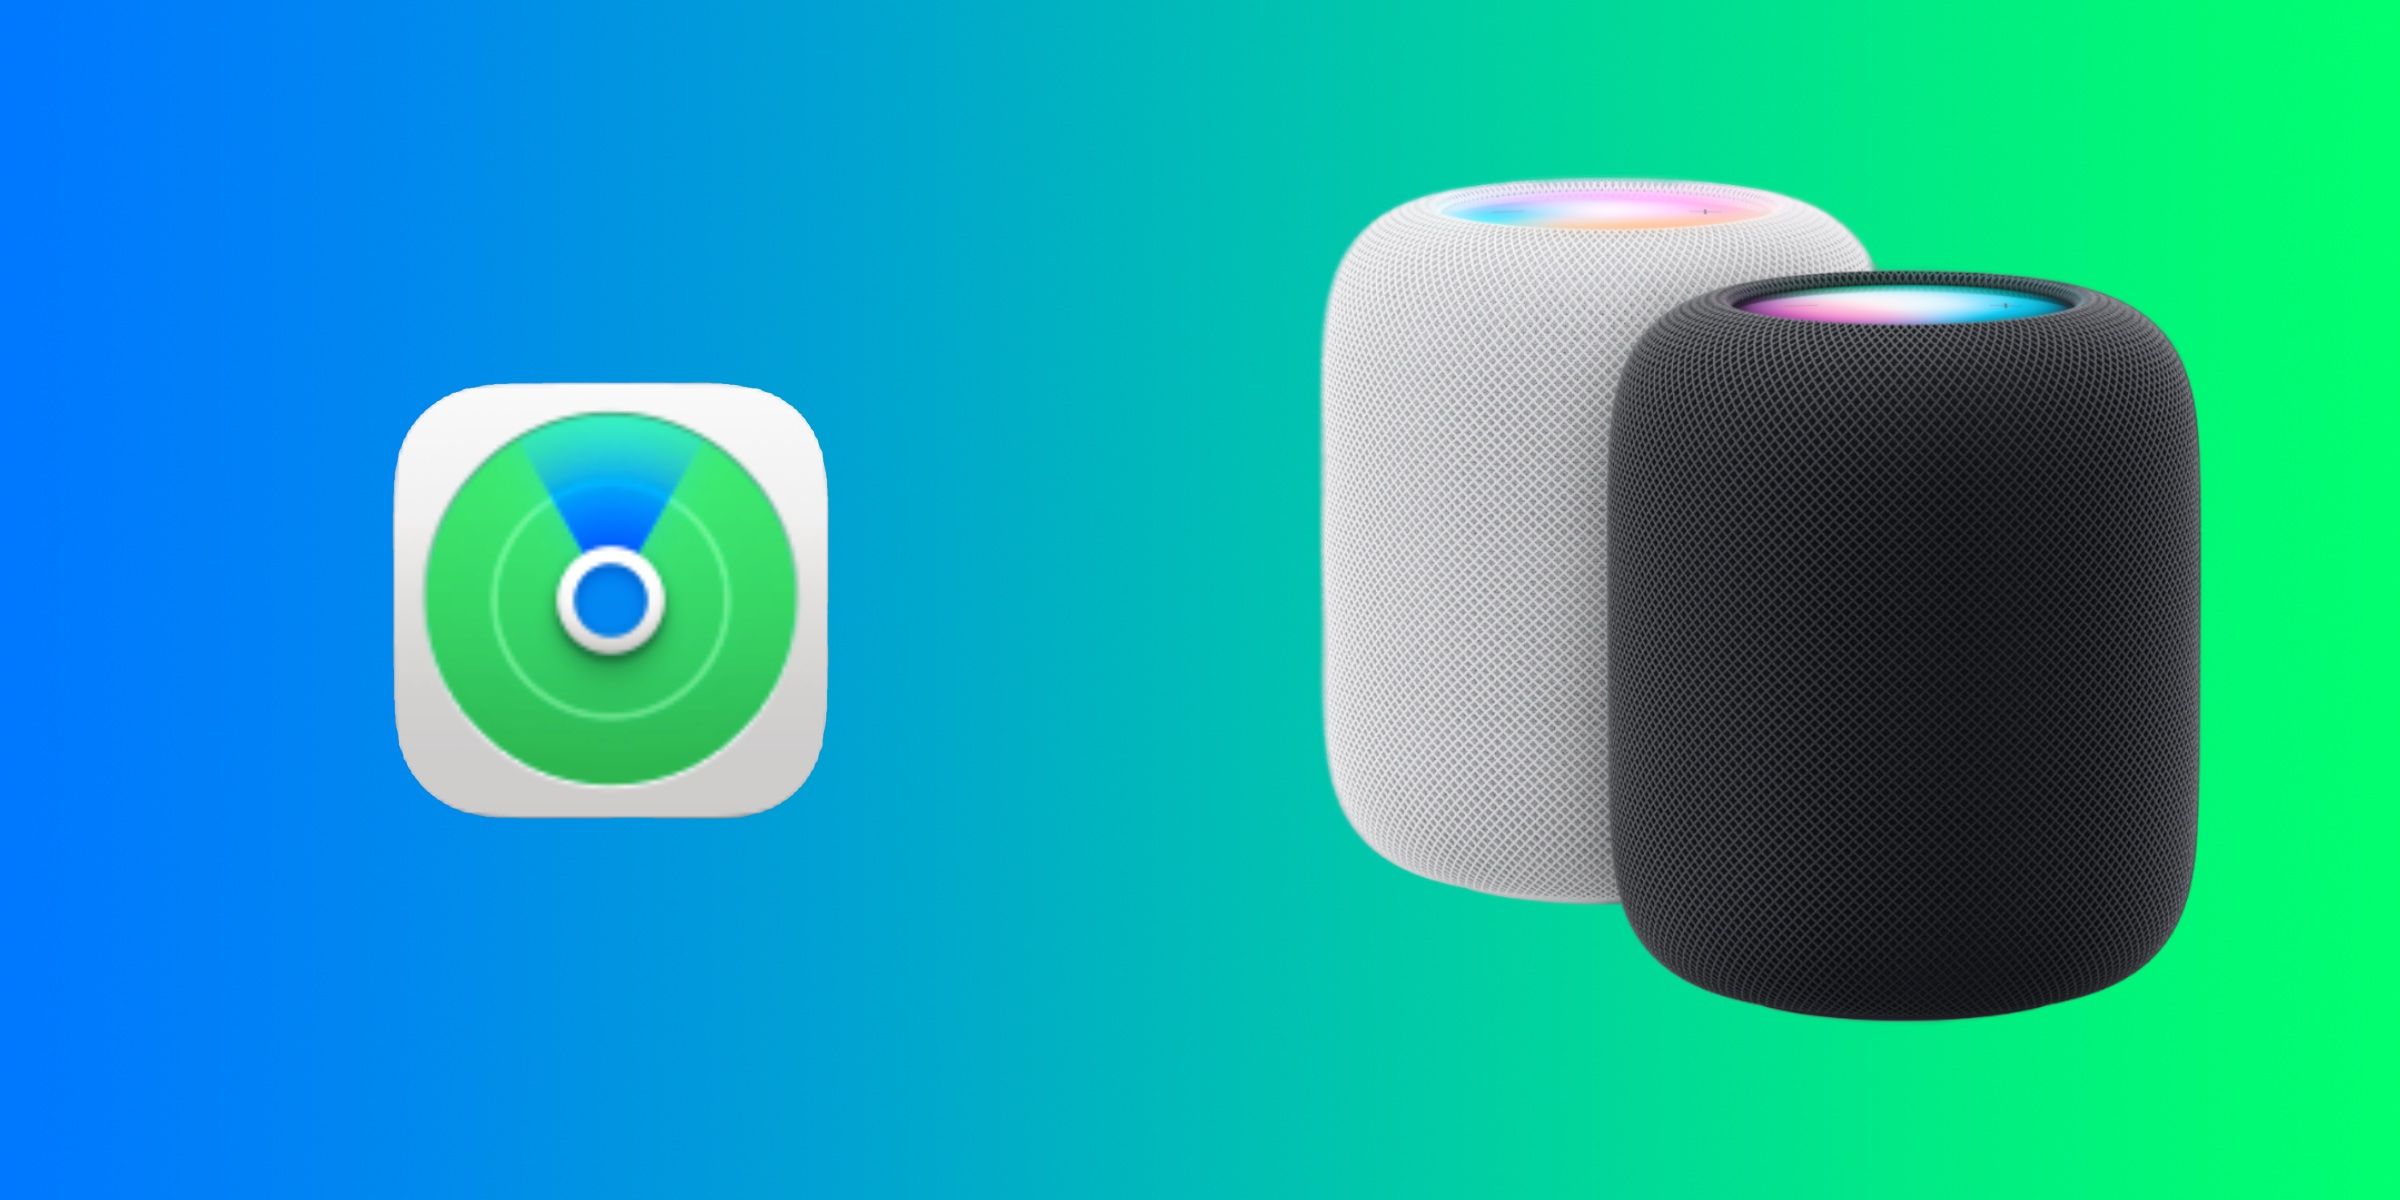 Apple's Find My logo beside a pair of second-generation HomePods.